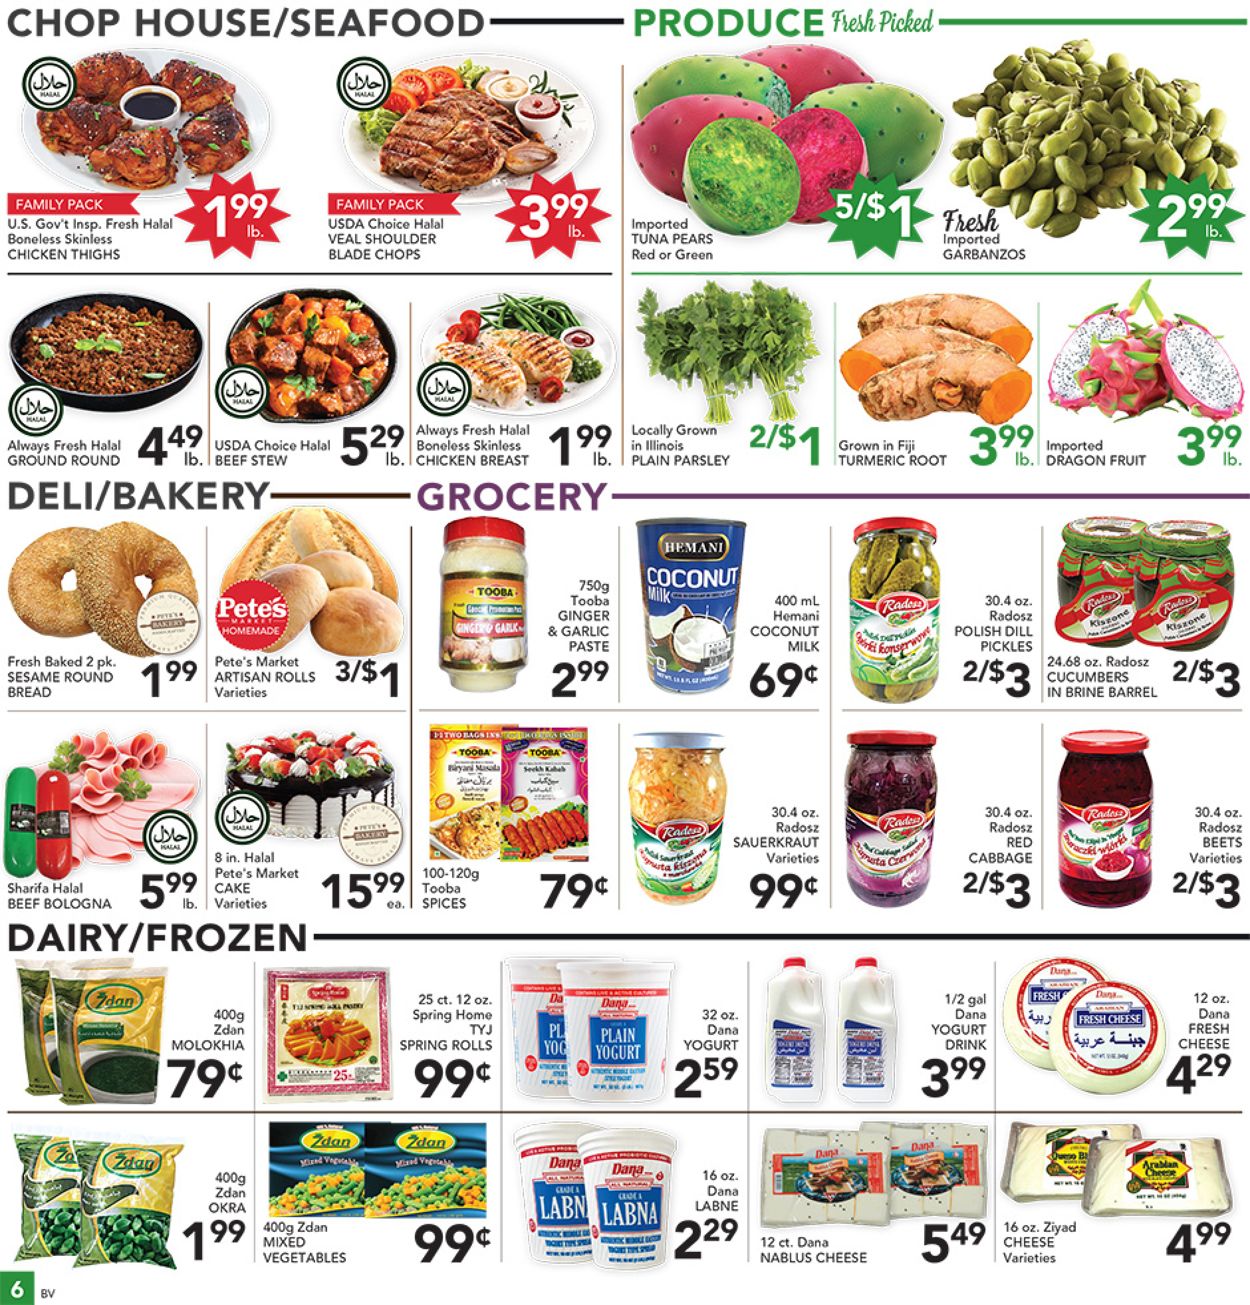 Catalogue Pete's Fresh Market from 09/30/2020